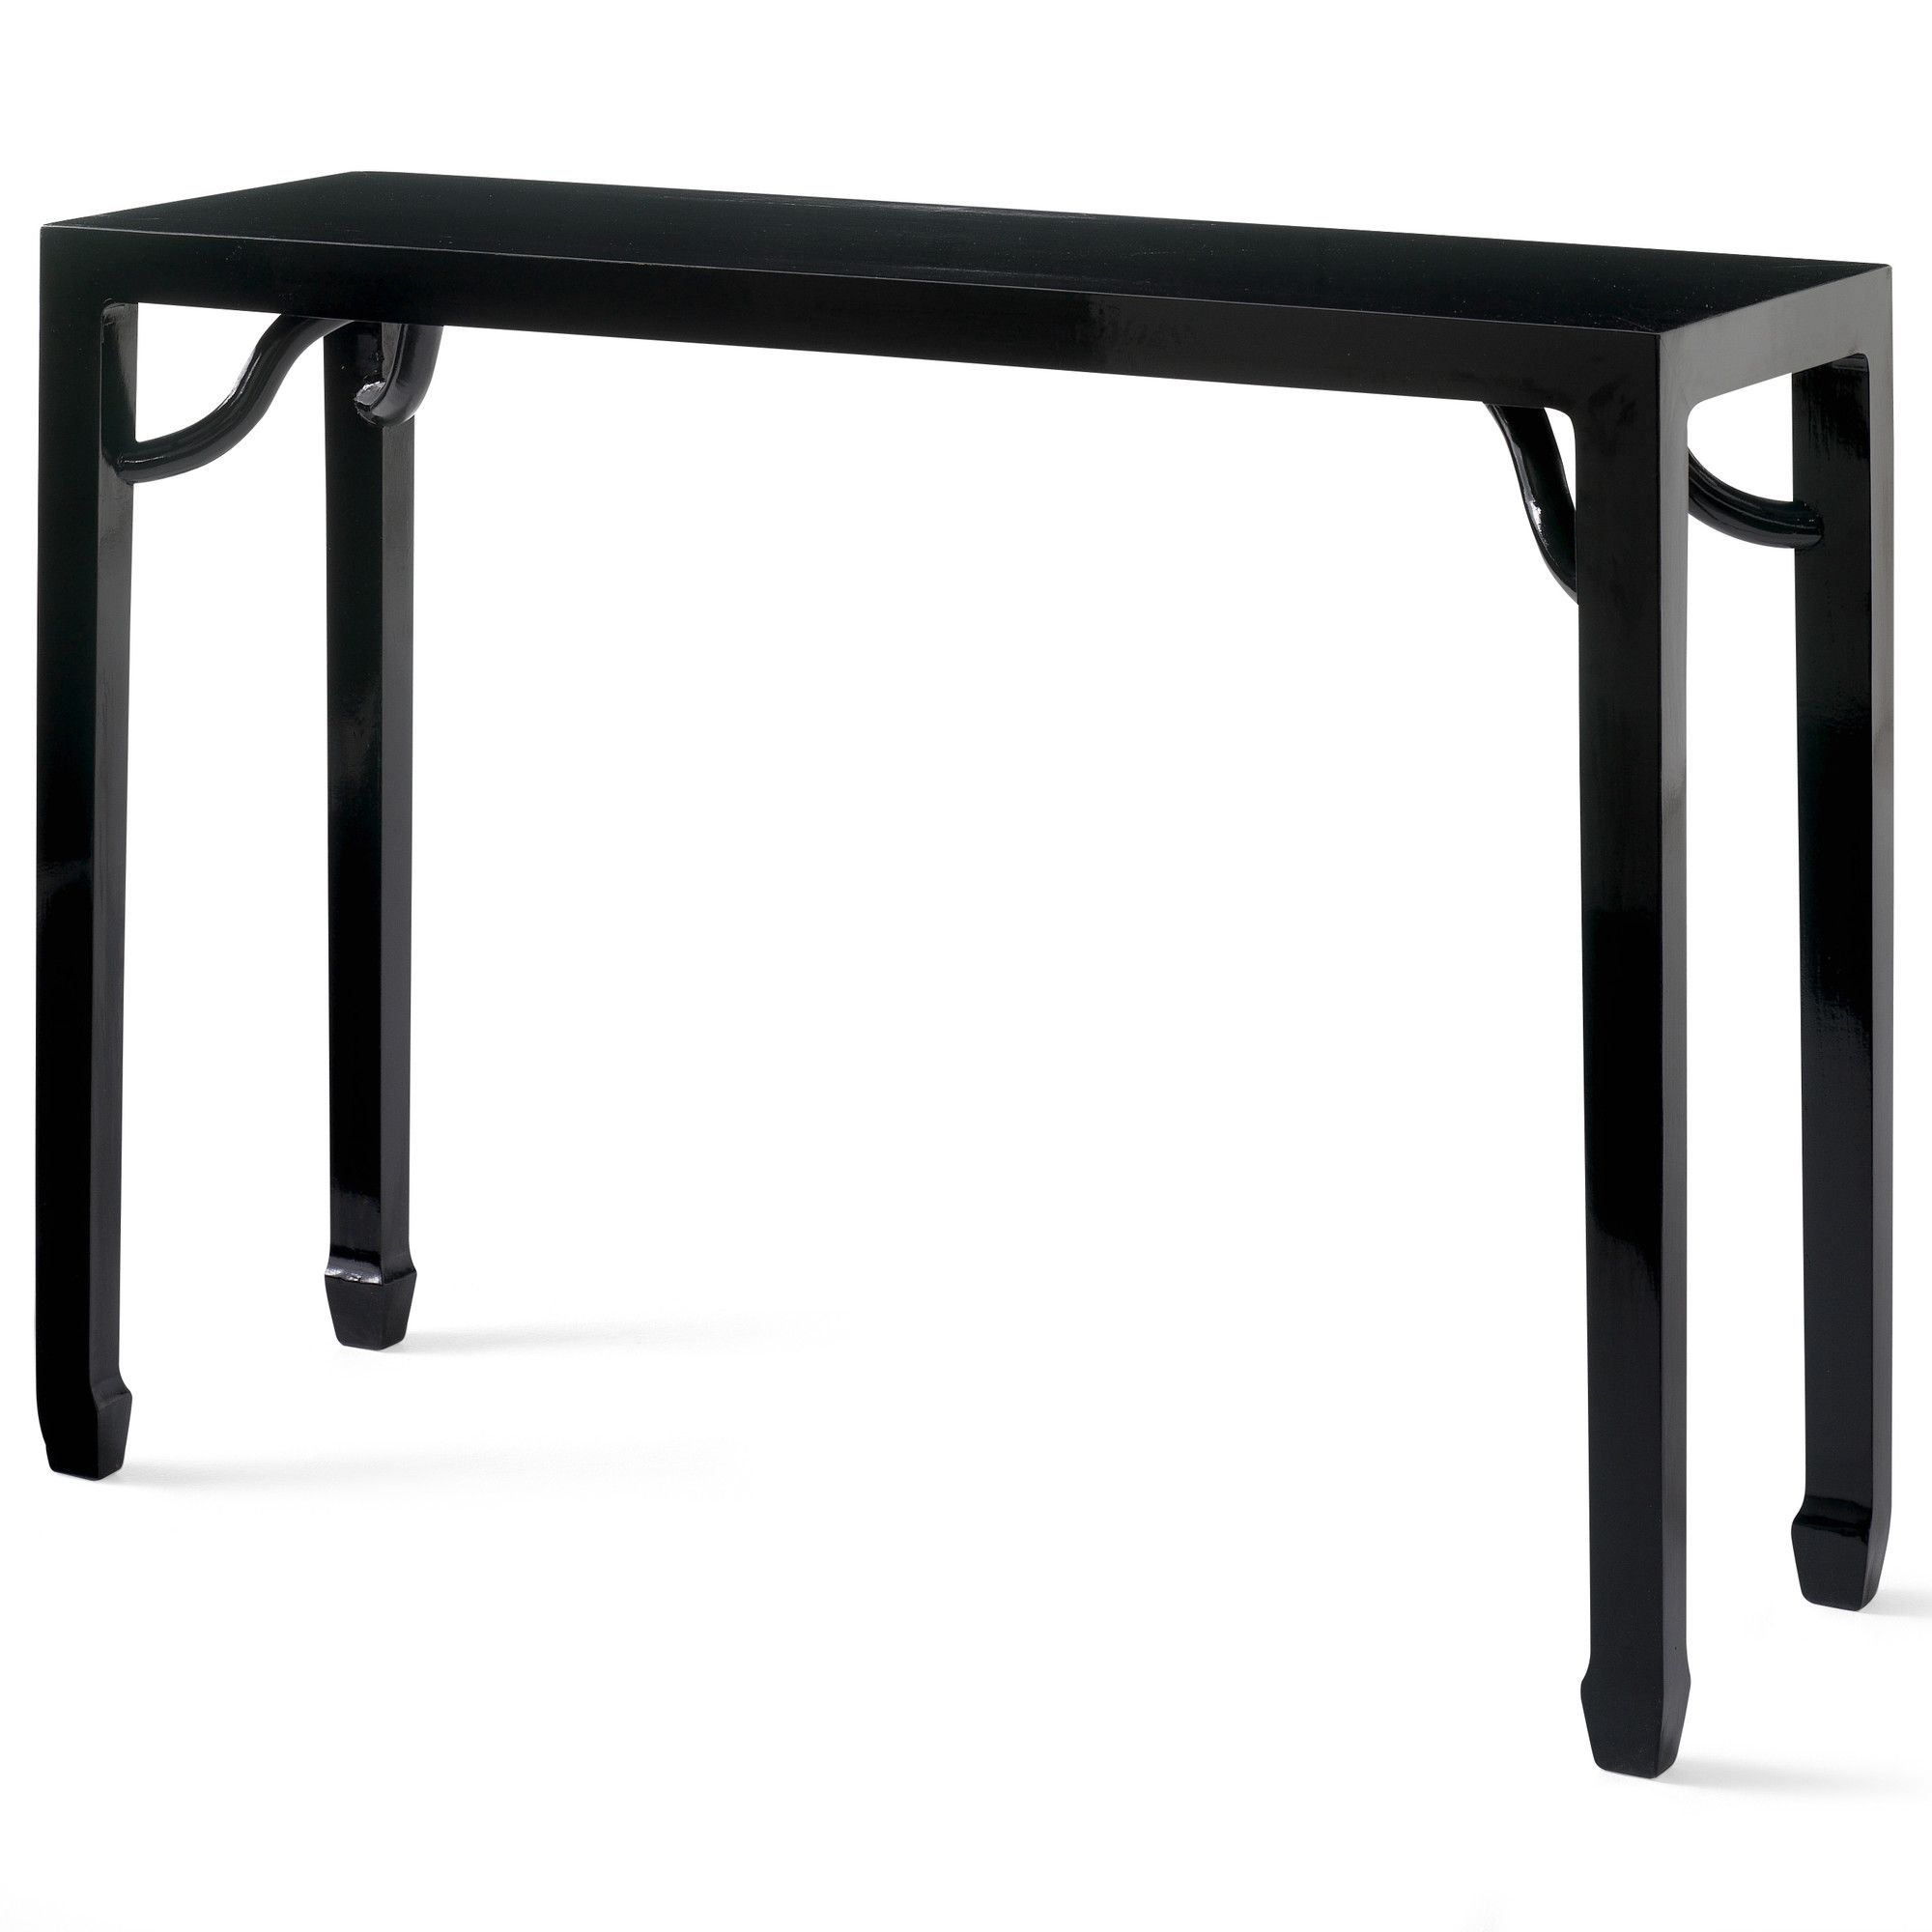 Shimu Chinese Classical Ming Console Table - Black Lacquer at Tesco Direct